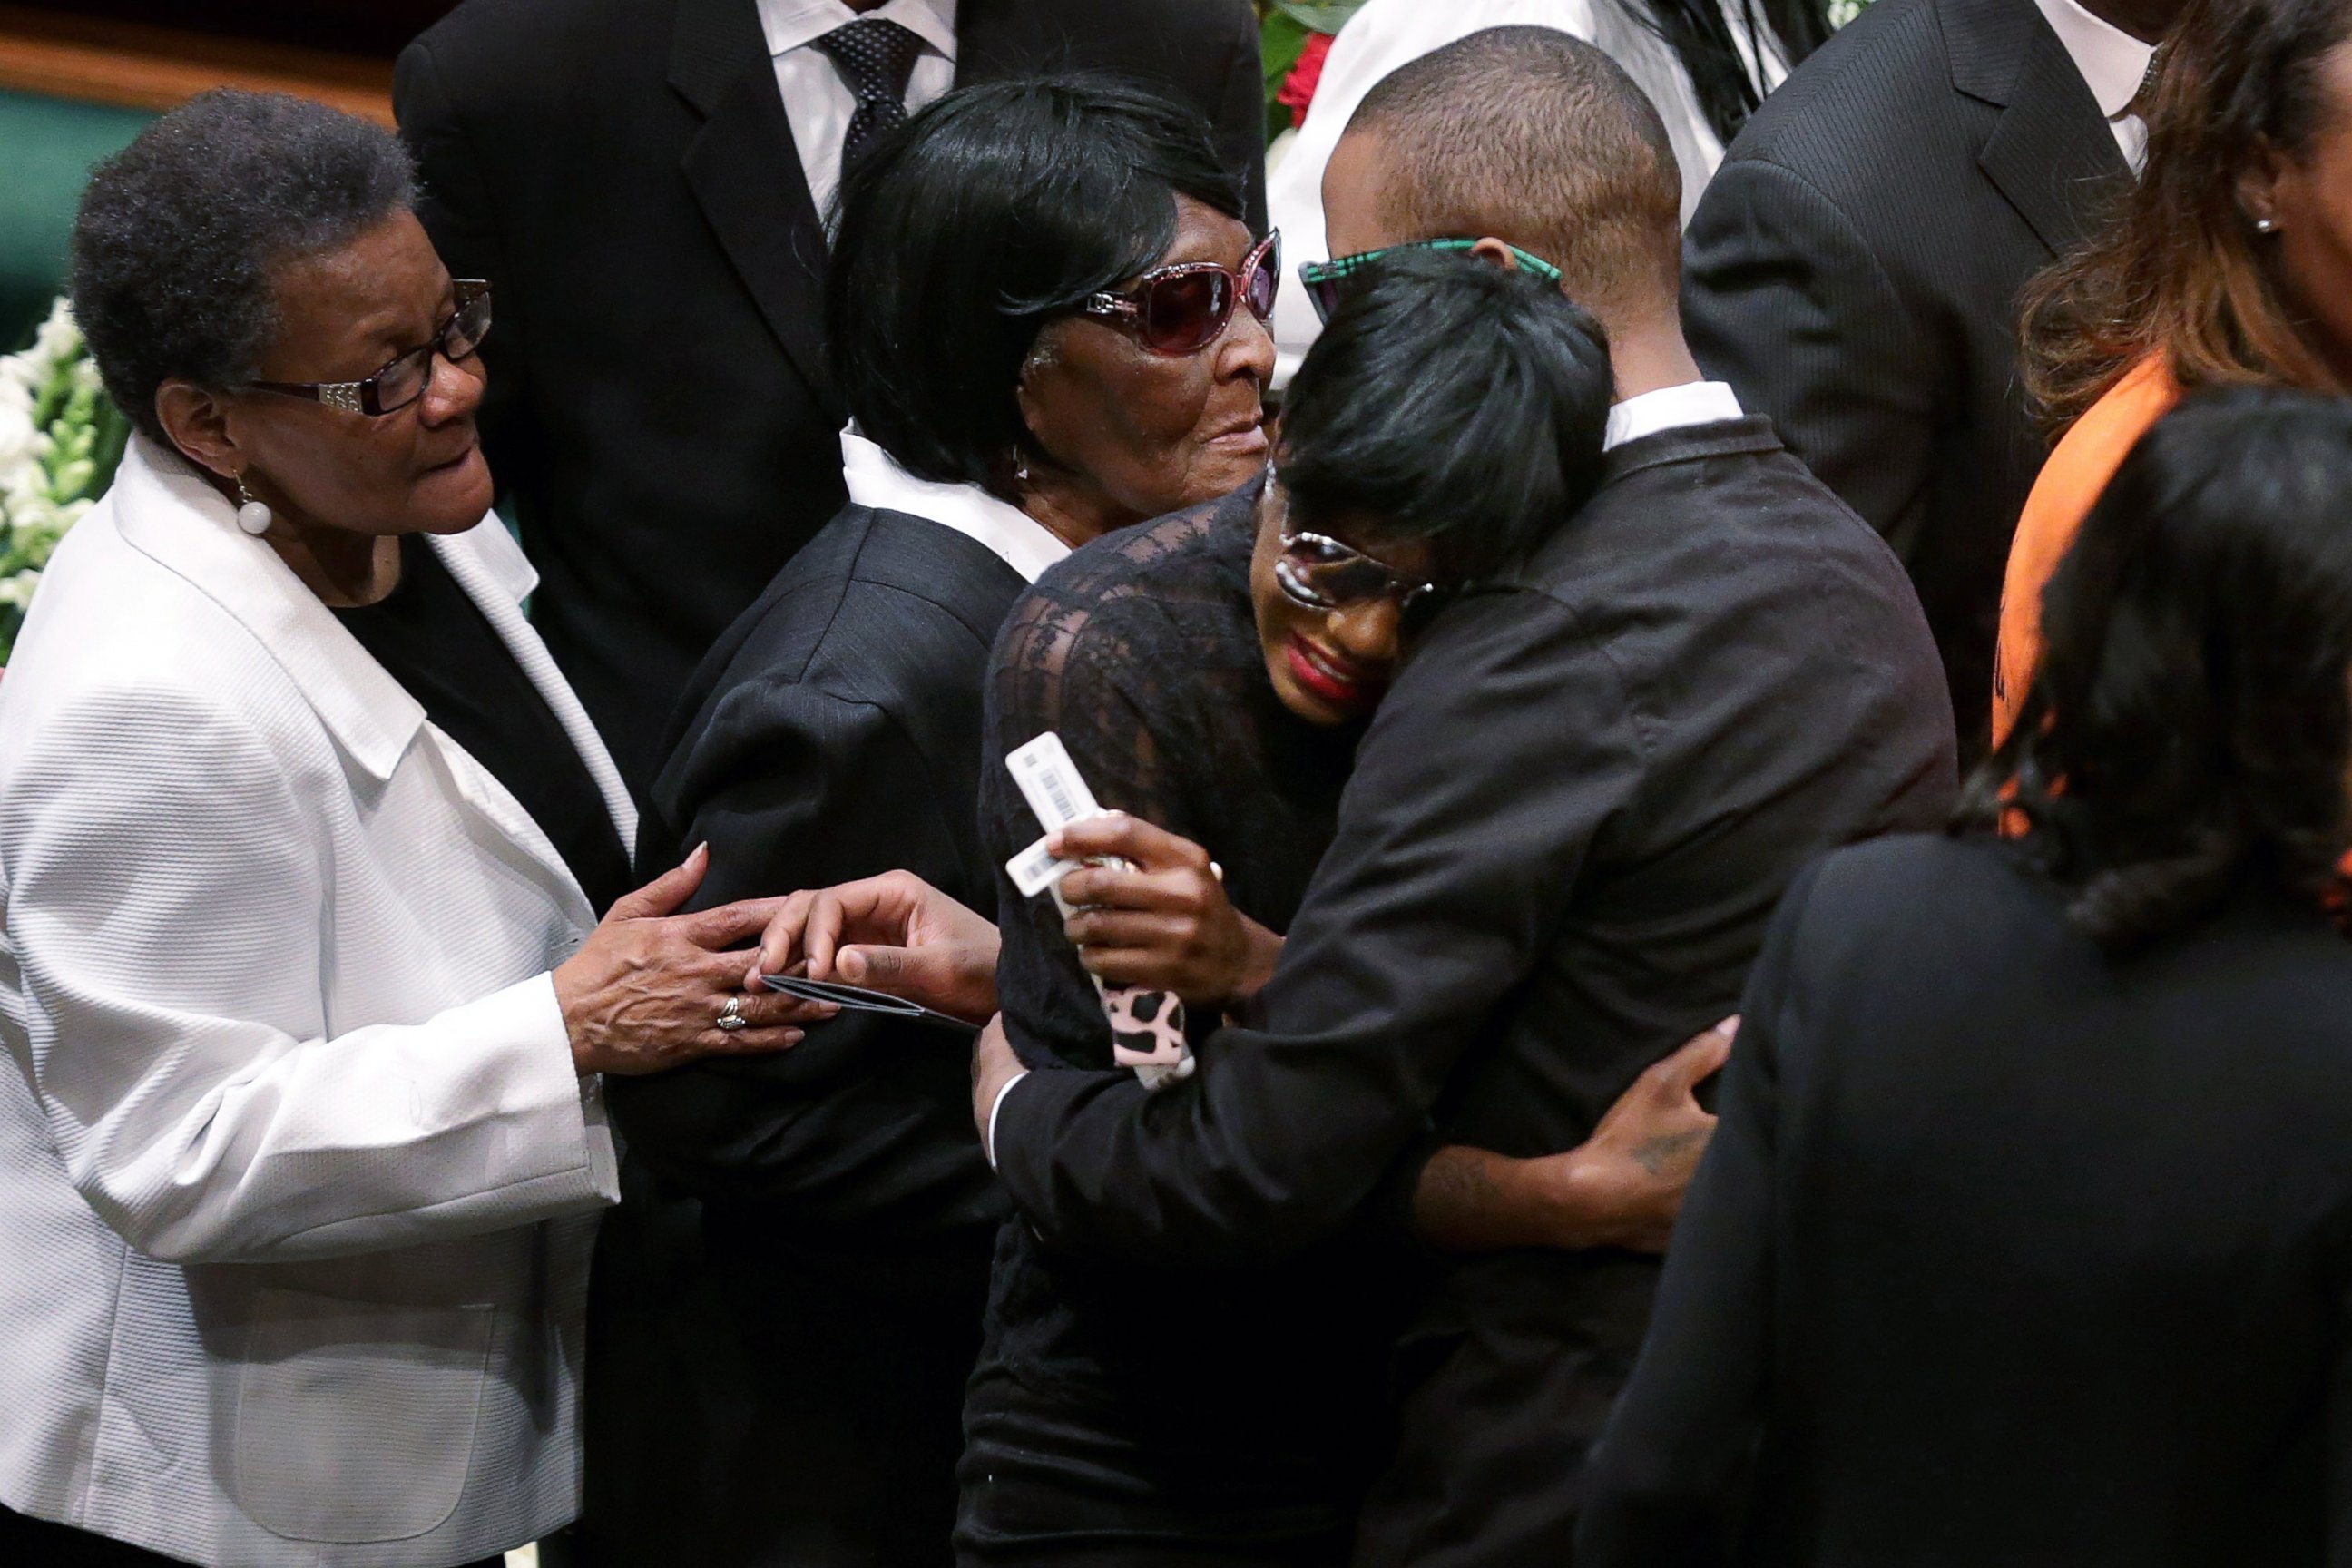 PHOTO: Freddie Gray's twin sister Fredericka Gray is embraced by family and supporters during her brother's funeral the New Shiloh Baptist Church during his funeral in Baltimore, April 27, 2015.